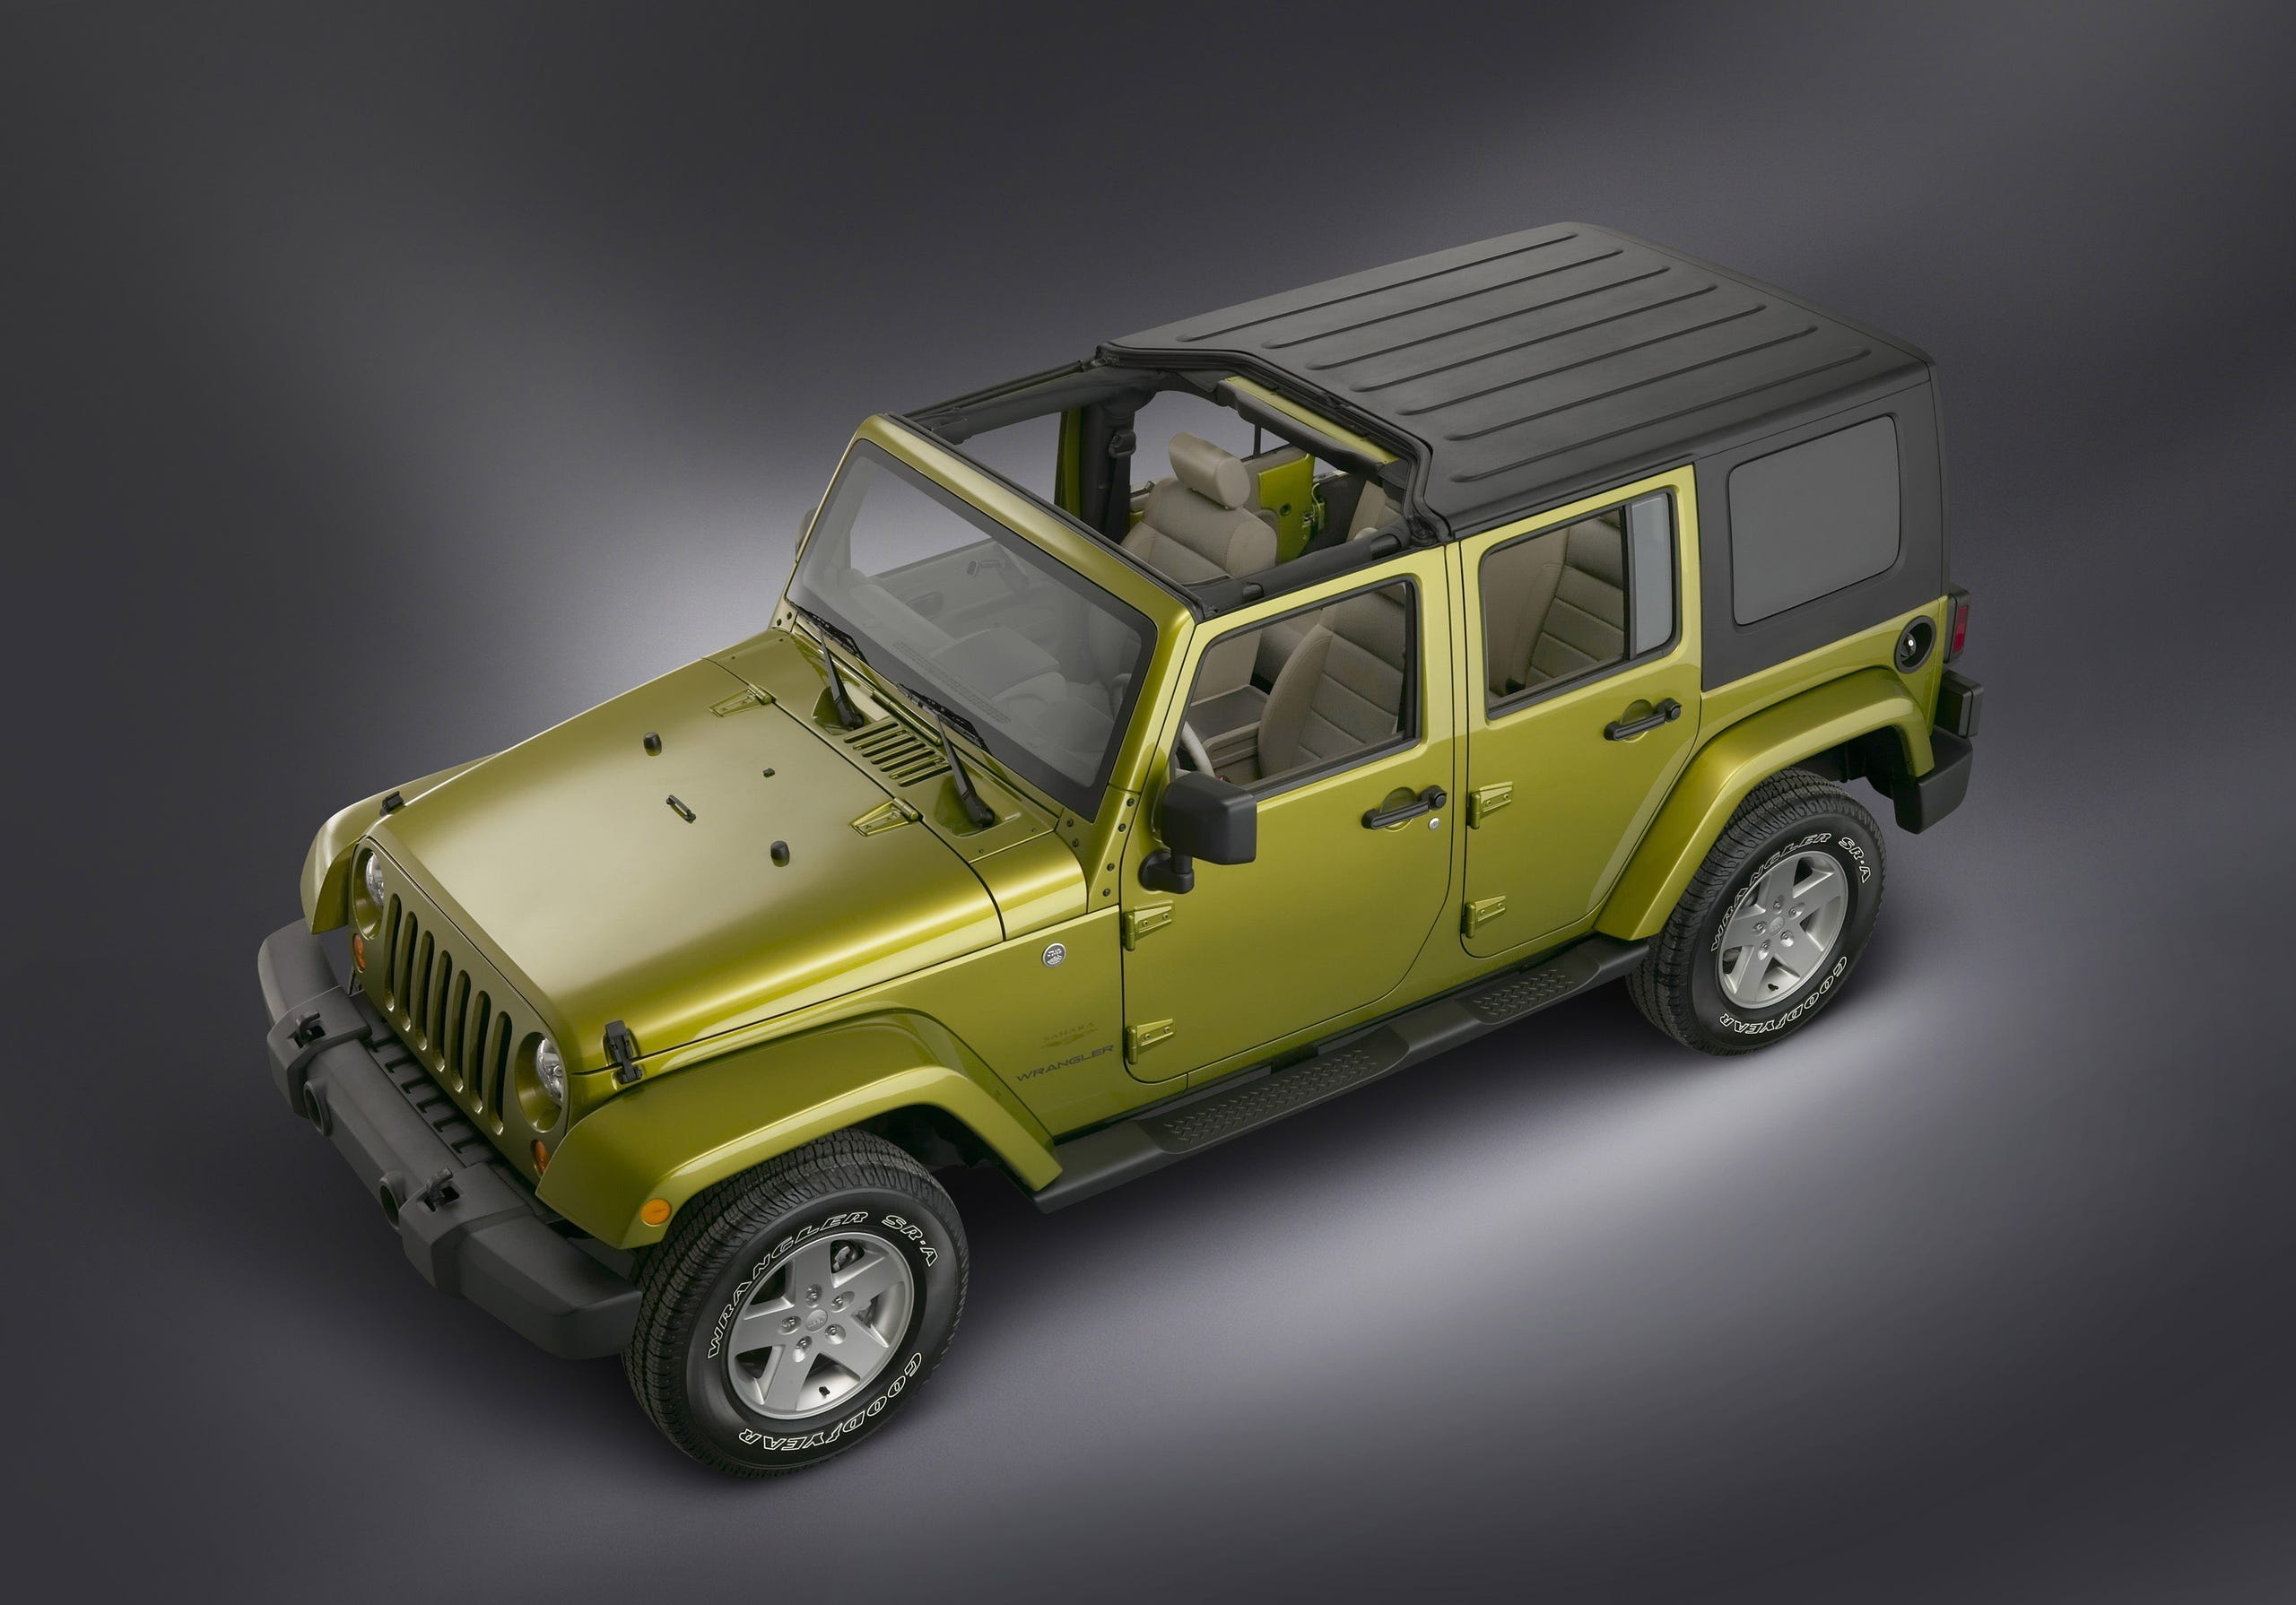 A 2007 Jeep Wrangler Unlimited.